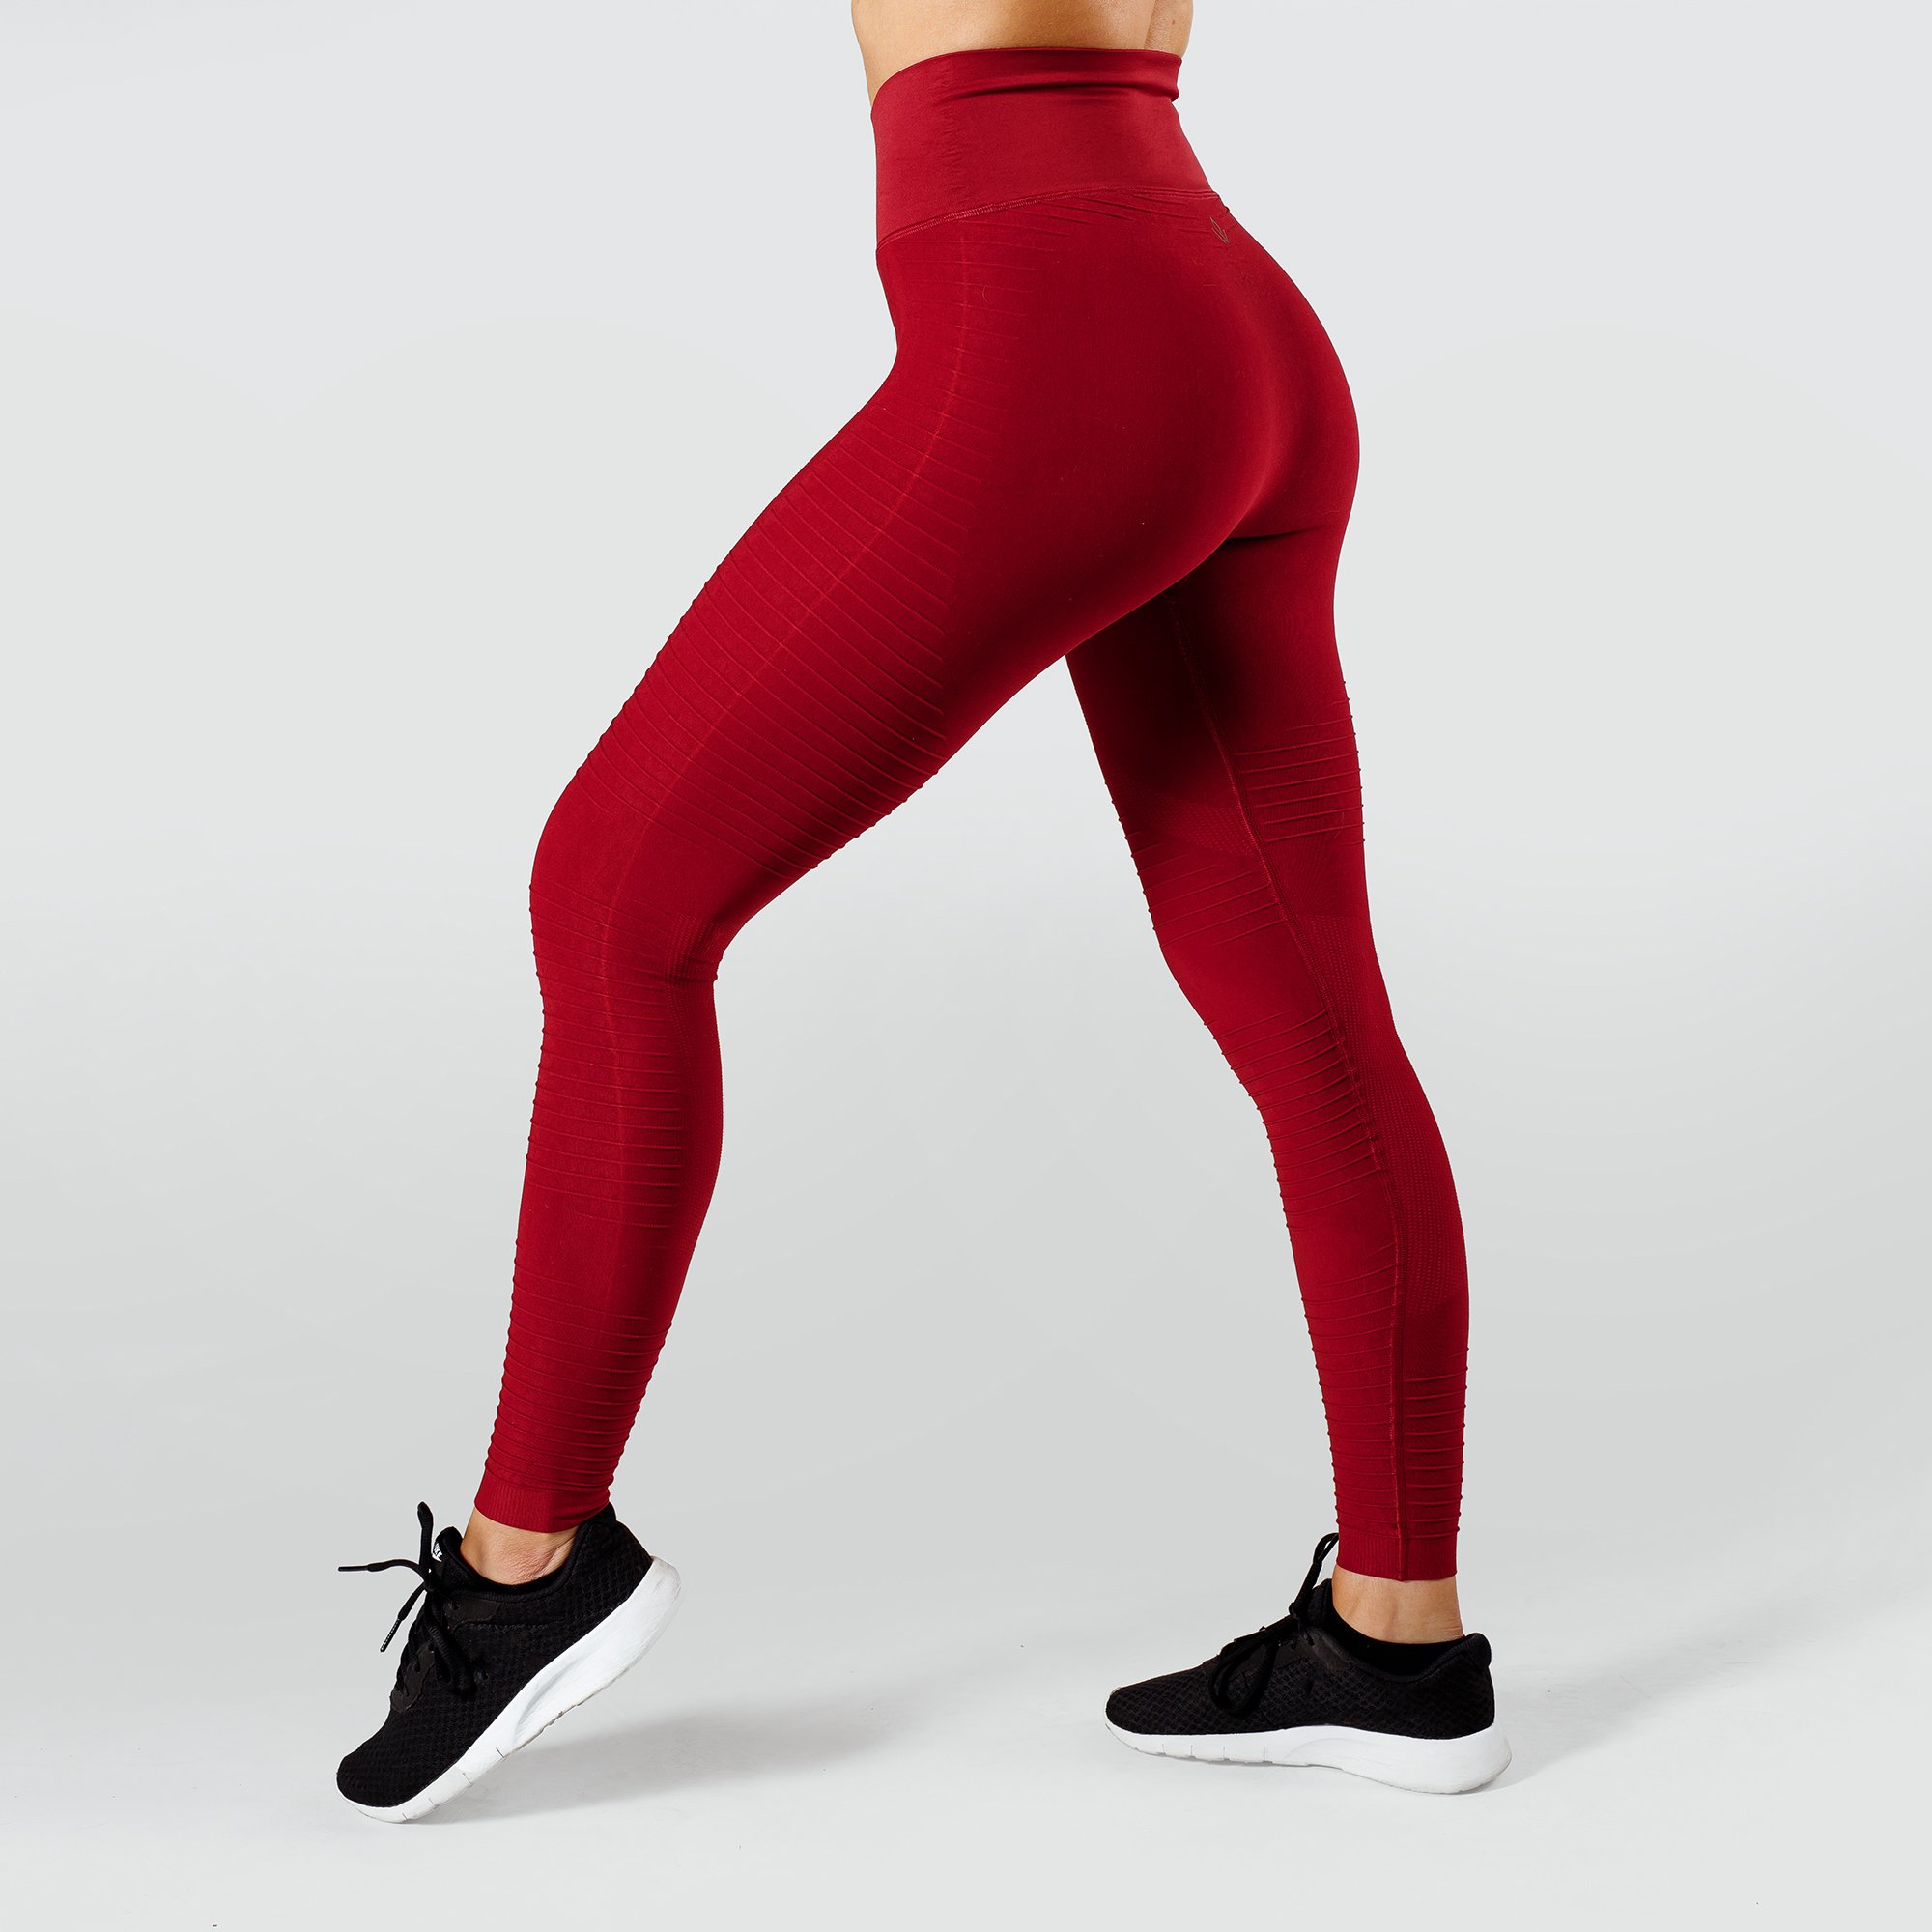 P.E Nation Rogue Fitness Workout Athletic Leggings in Red